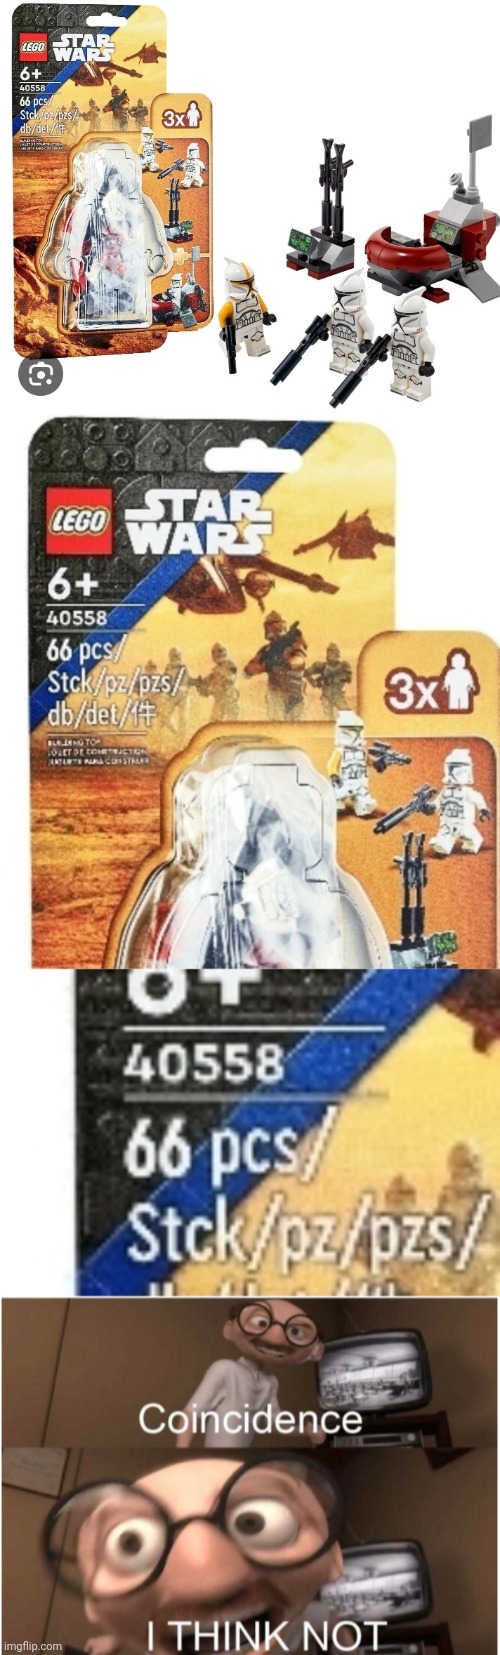 66 pieces | image tagged in coincidence i think not,order 66,lego,star wars,lego star wars,execute order 66 | made w/ Imgflip meme maker